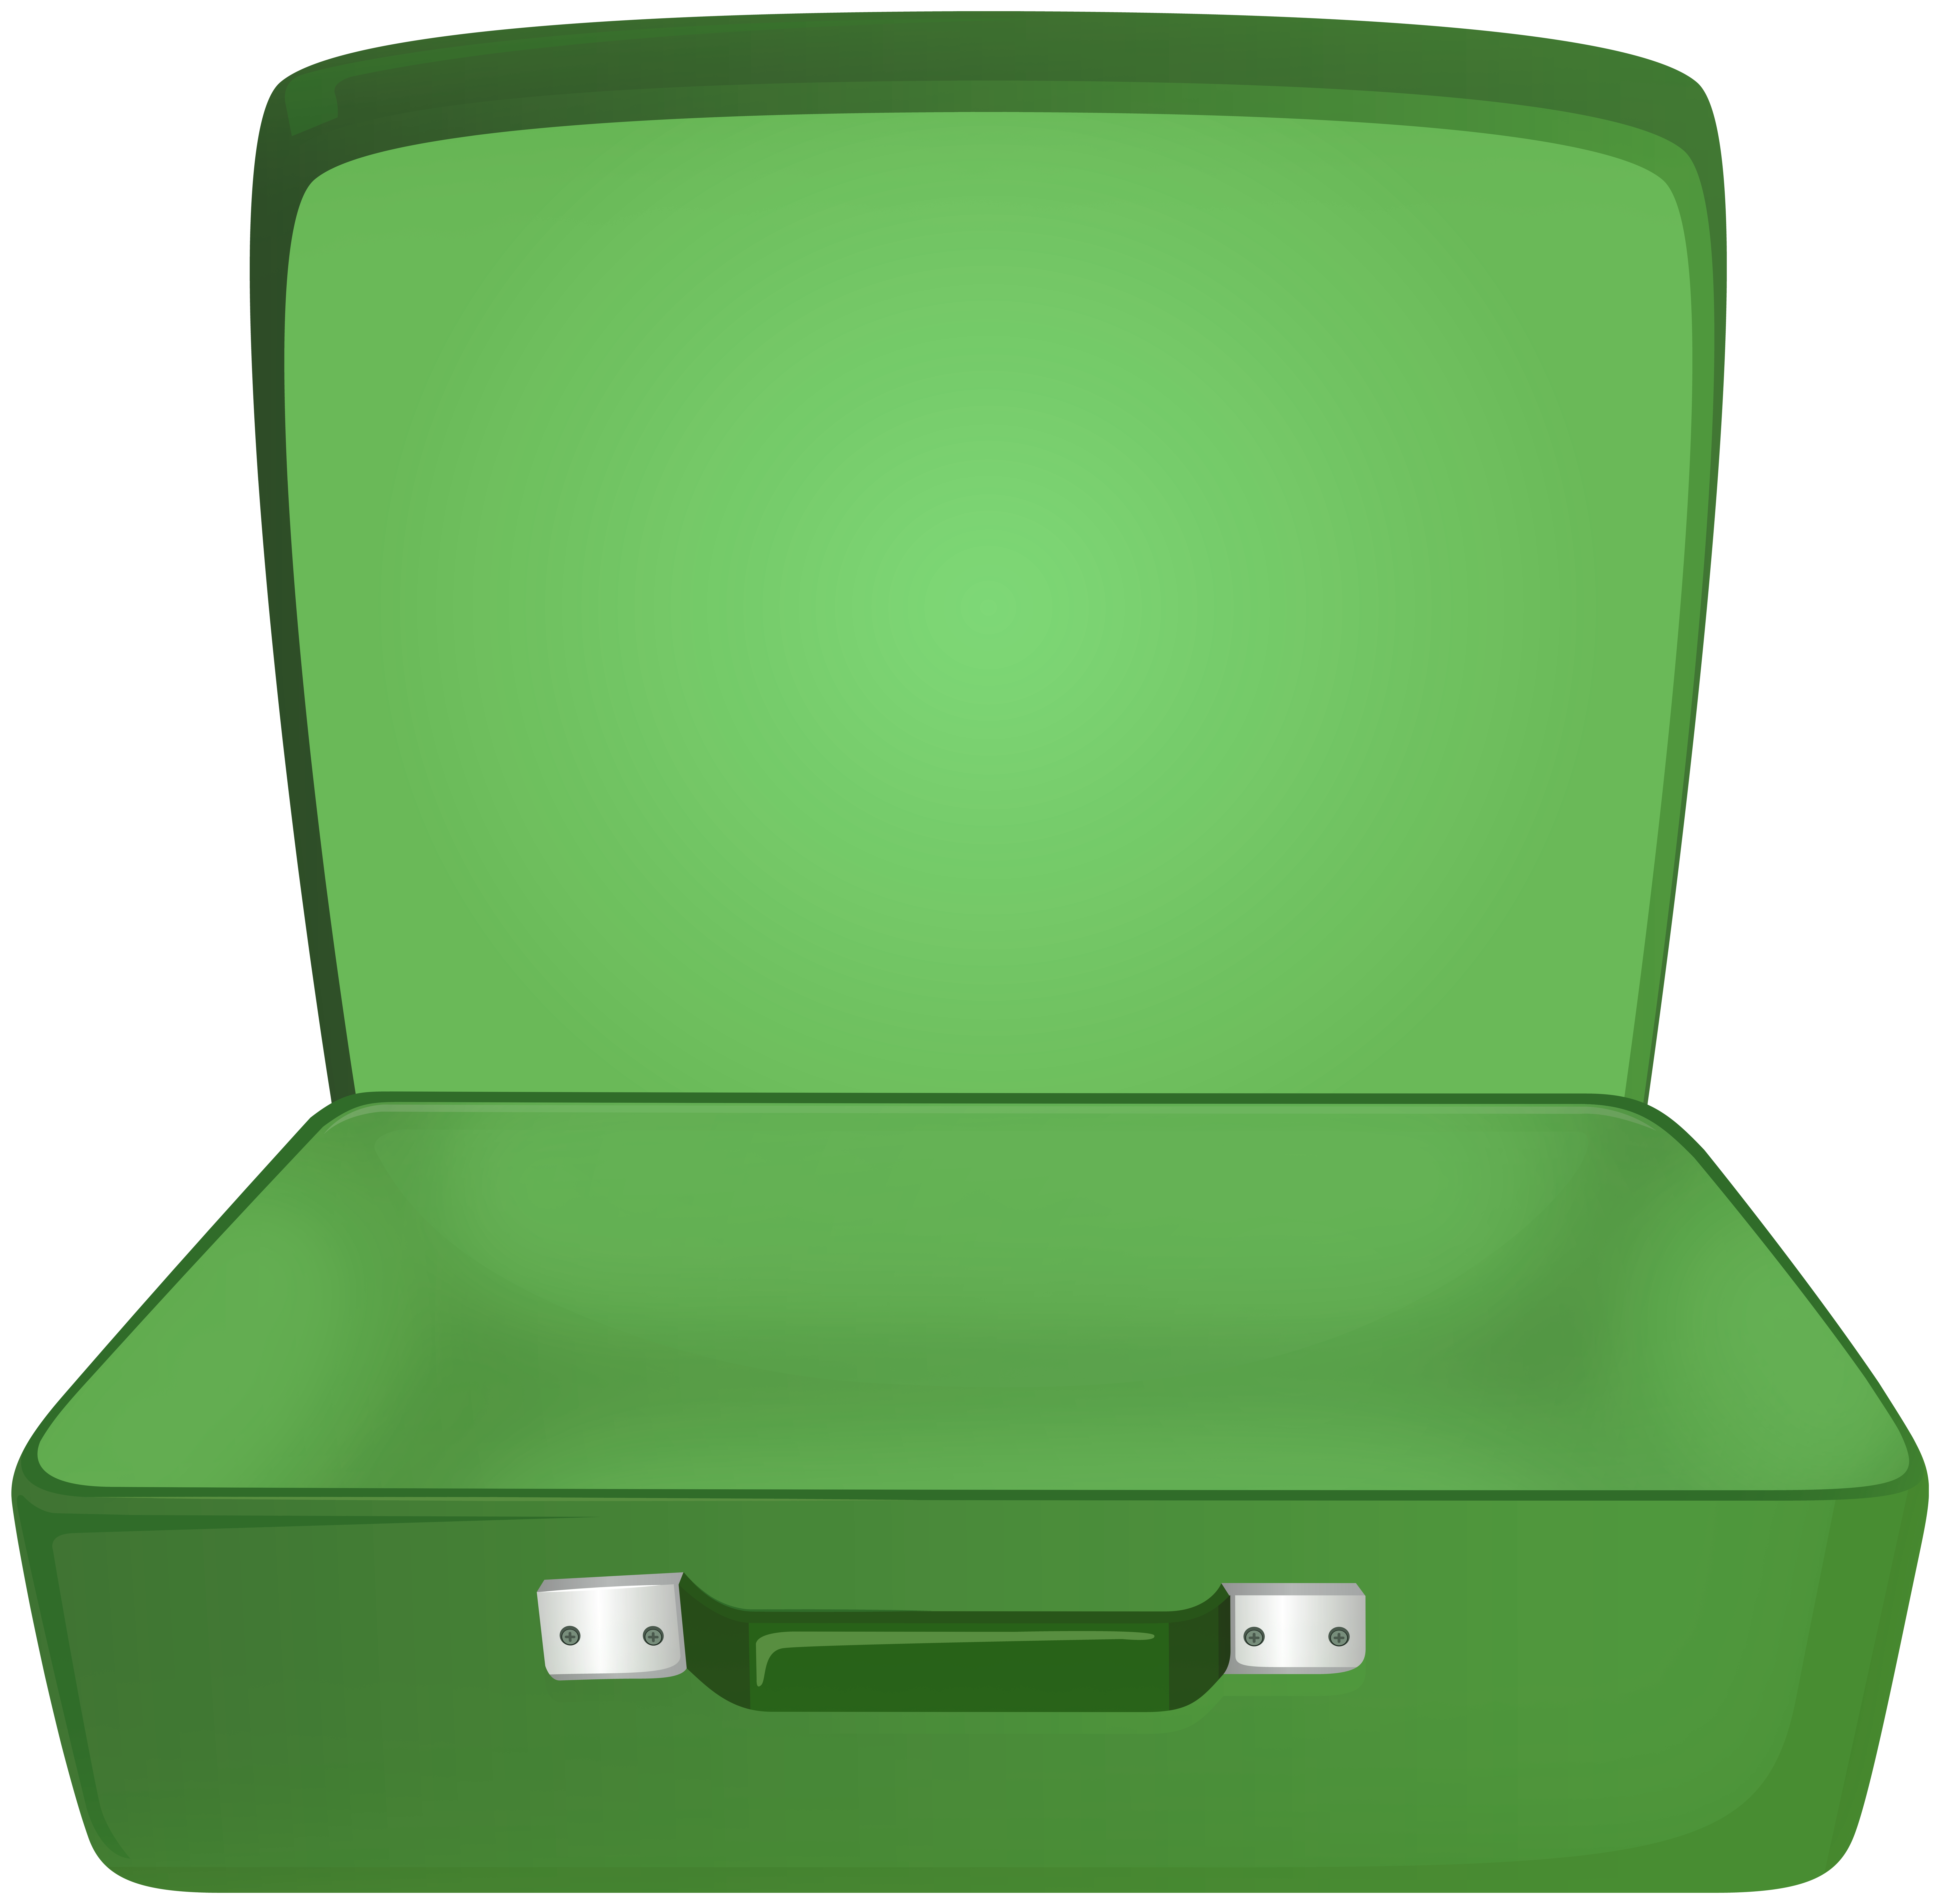 Green Open Suitcase PNG Clipart​ | Gallery Yopriceville - High-Quality Free  Images and Transparent PNG Clipart